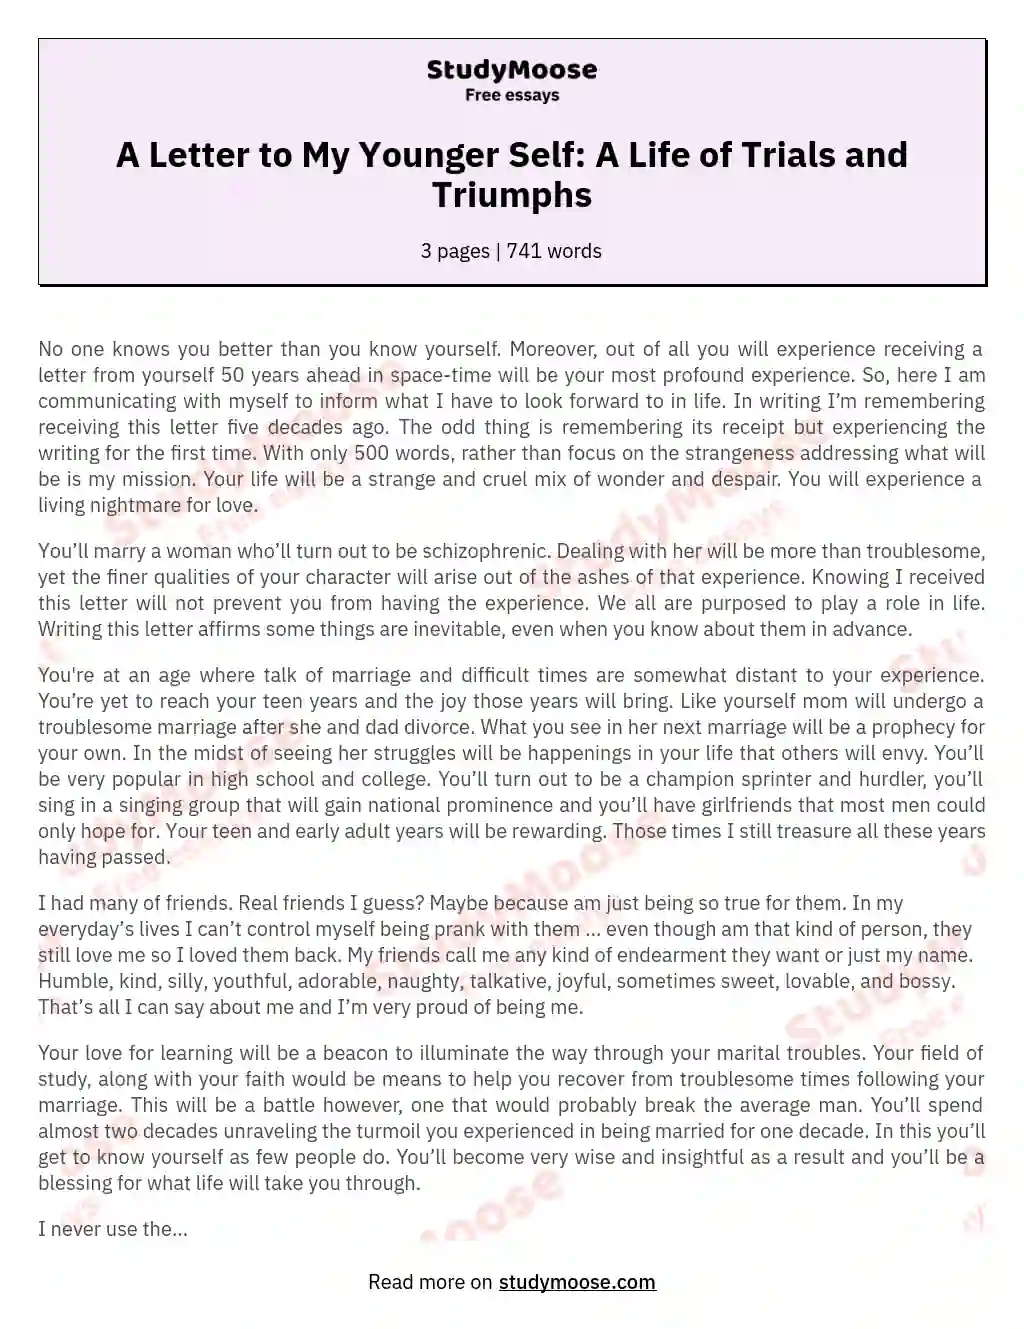 A Letter to My Younger Self: A Life of Trials and Triumphs essay